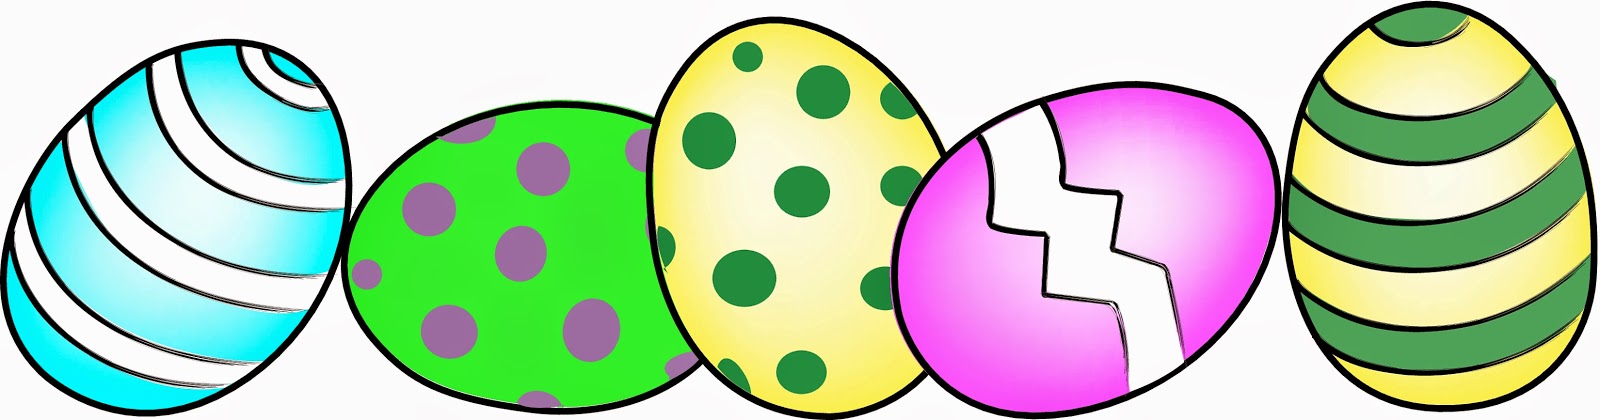 Banners clipart easter egg, Banners easter egg Transparent.